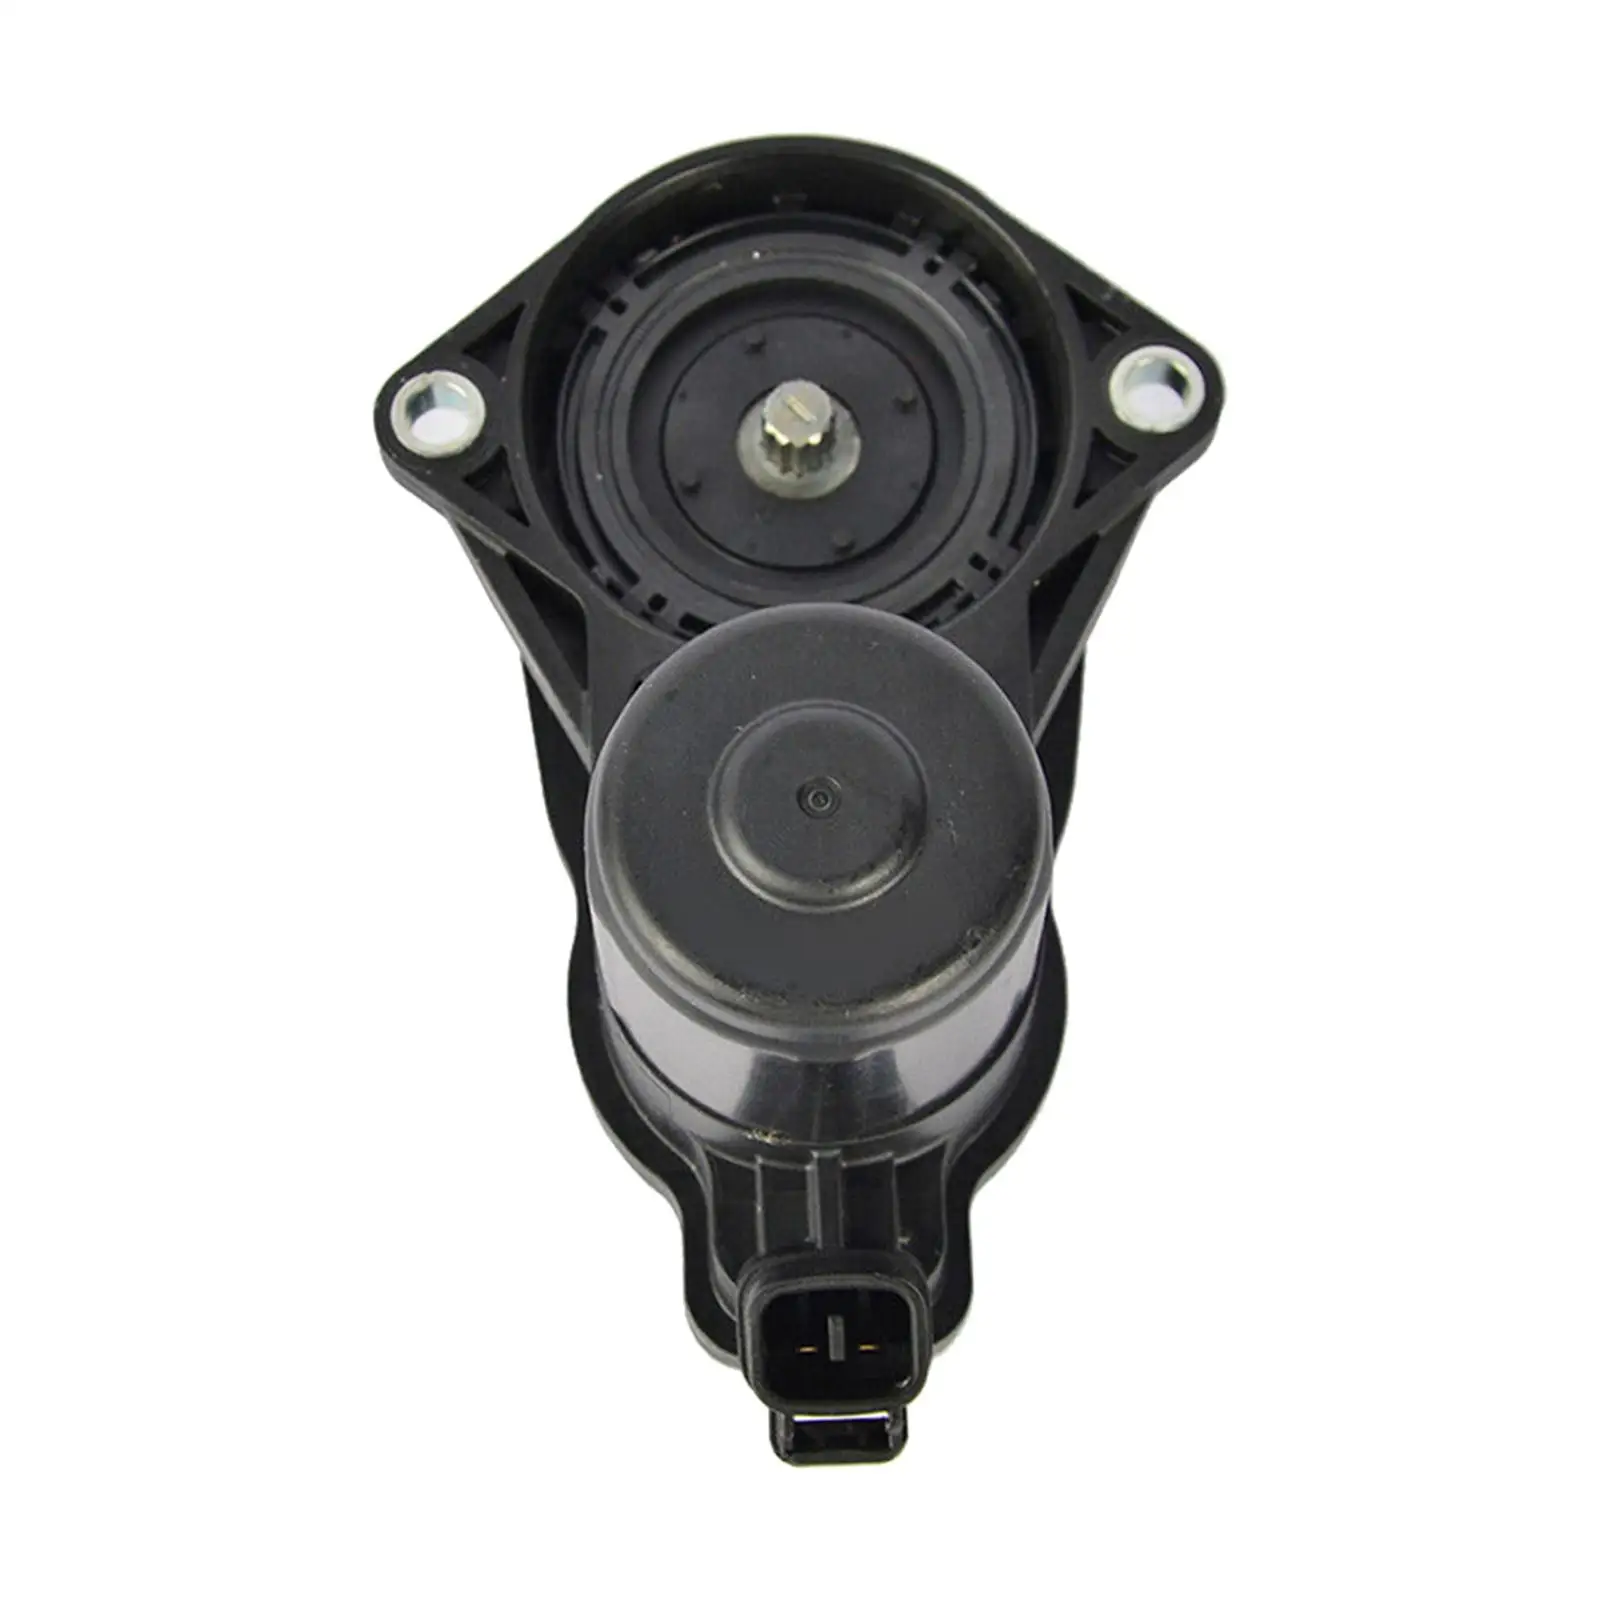 Parking Brake Actuator Assembly Replacement Automotive Replacement Part for Toyota Avalon Venza Corolla Hatchback